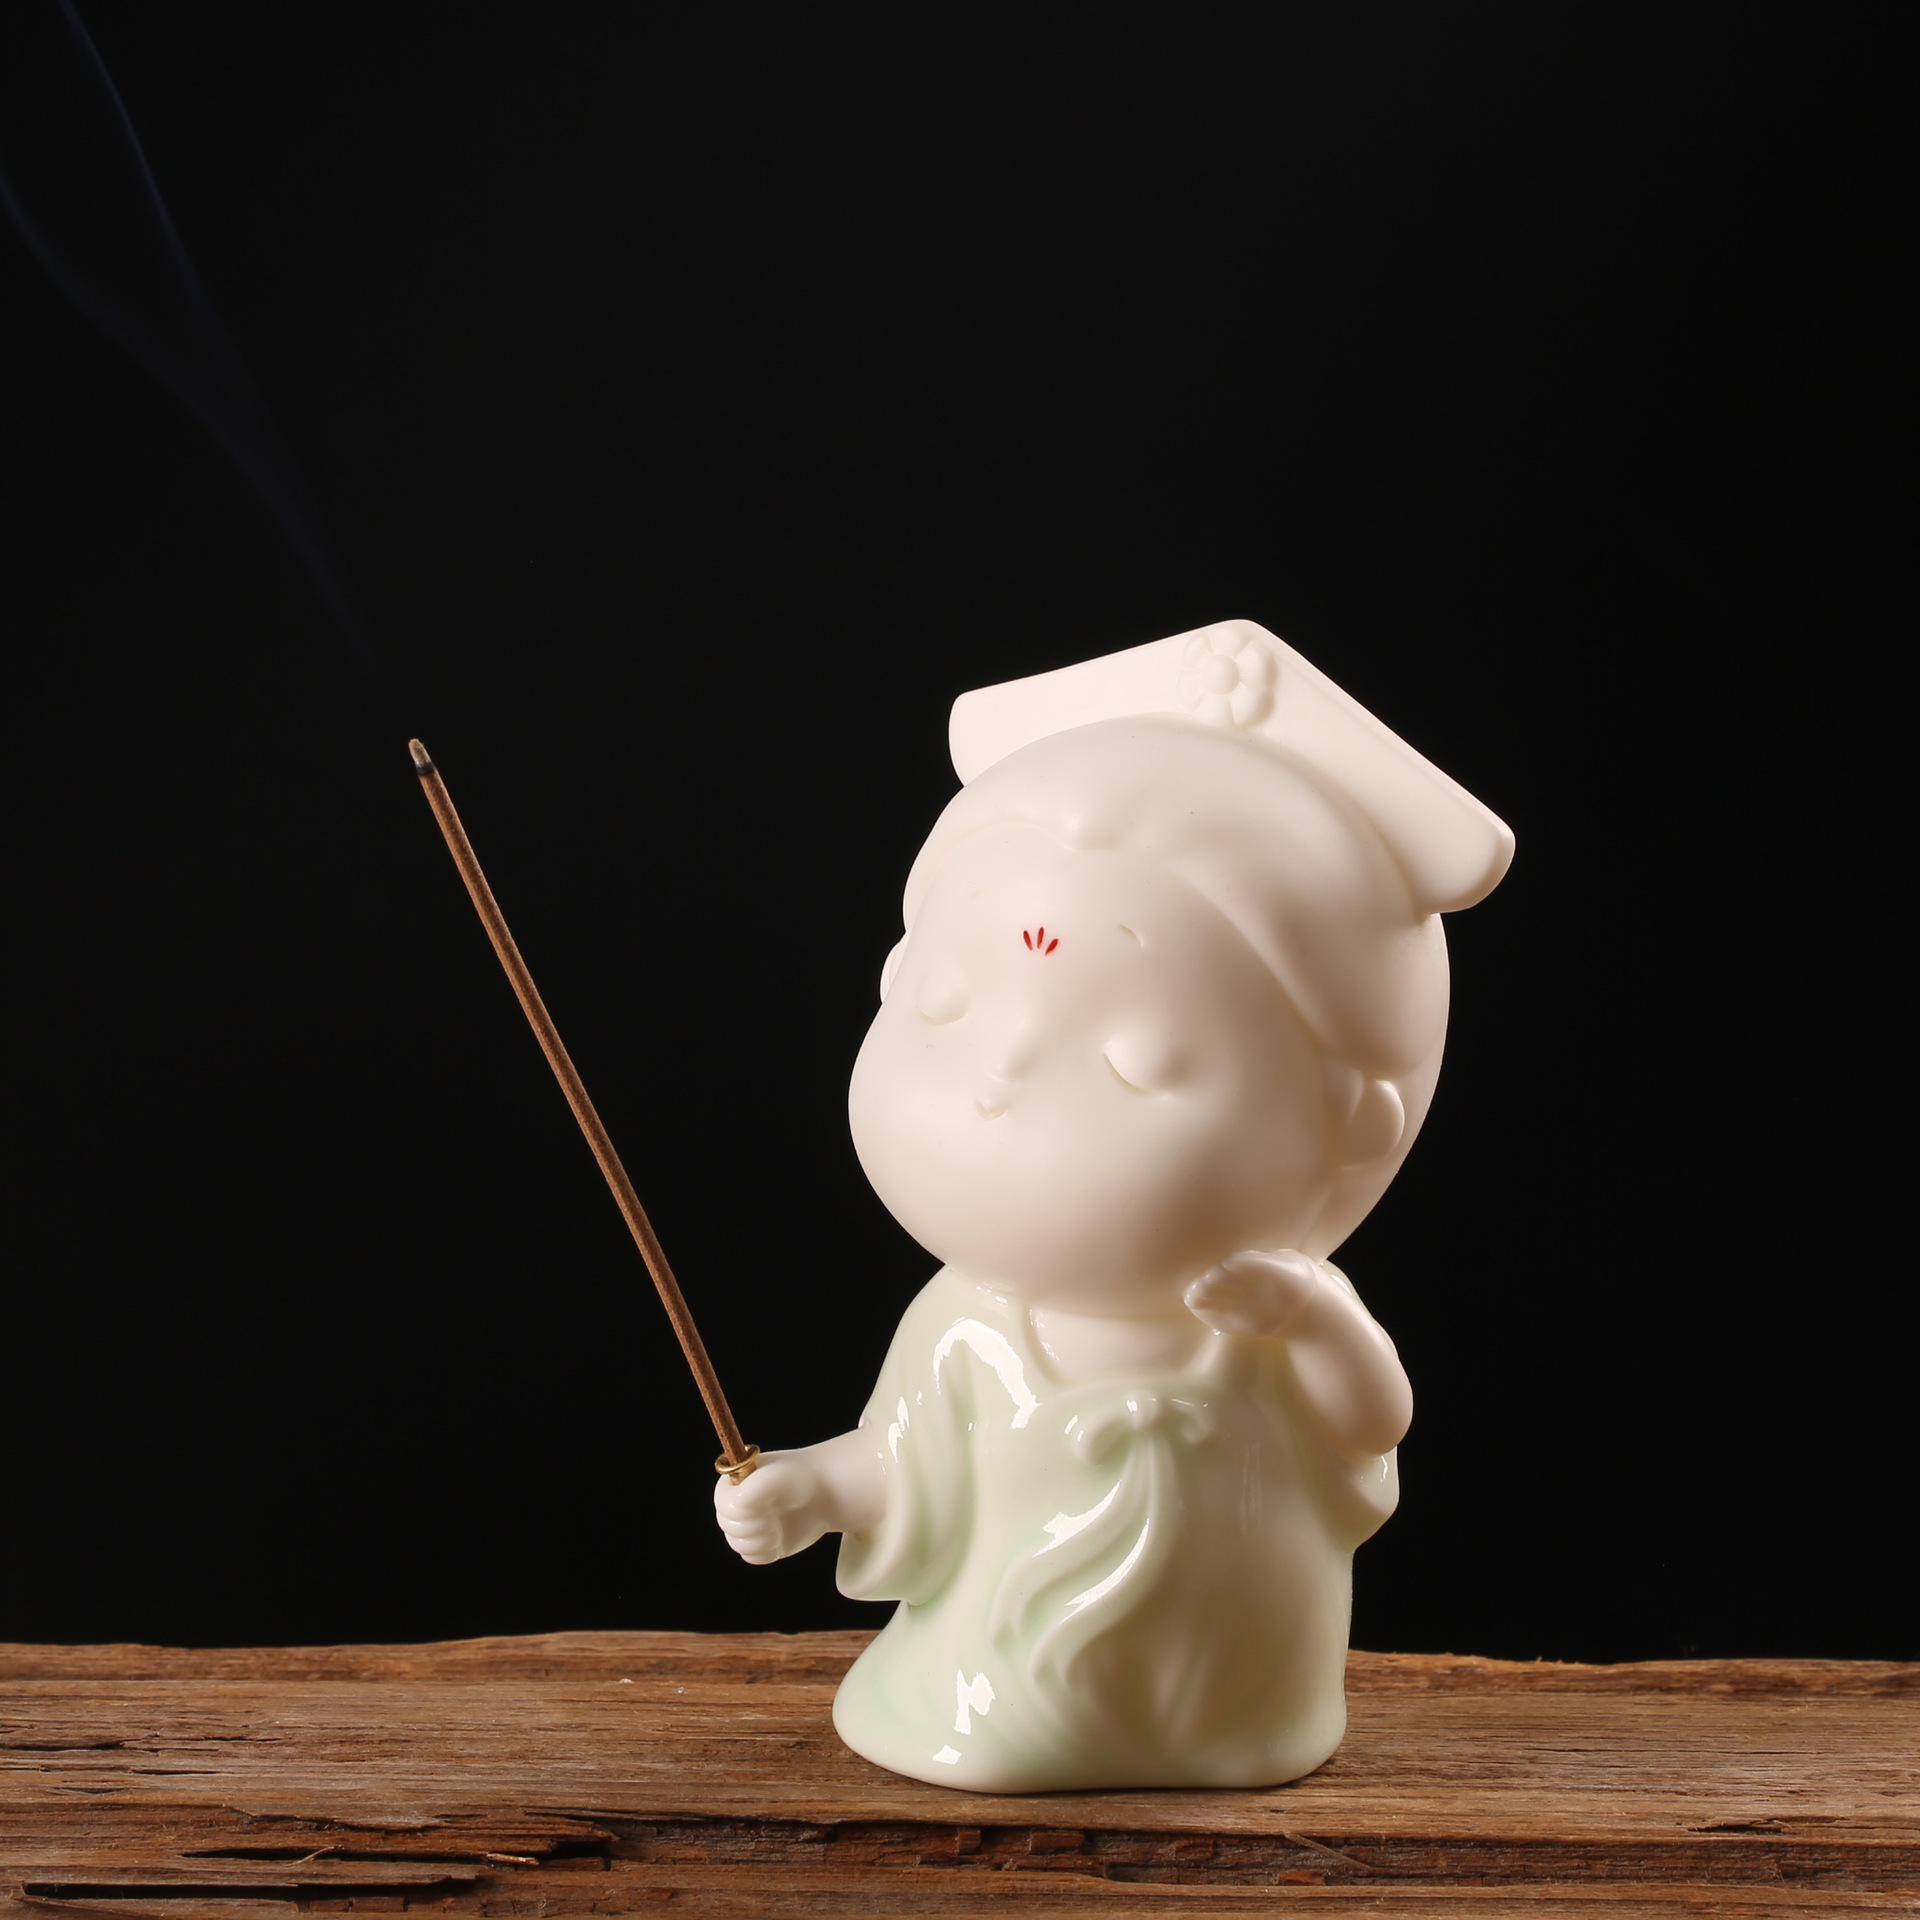 Xiao Gong'e Incense Insert - Celadon Touching Noodles (Send Thread Incense)